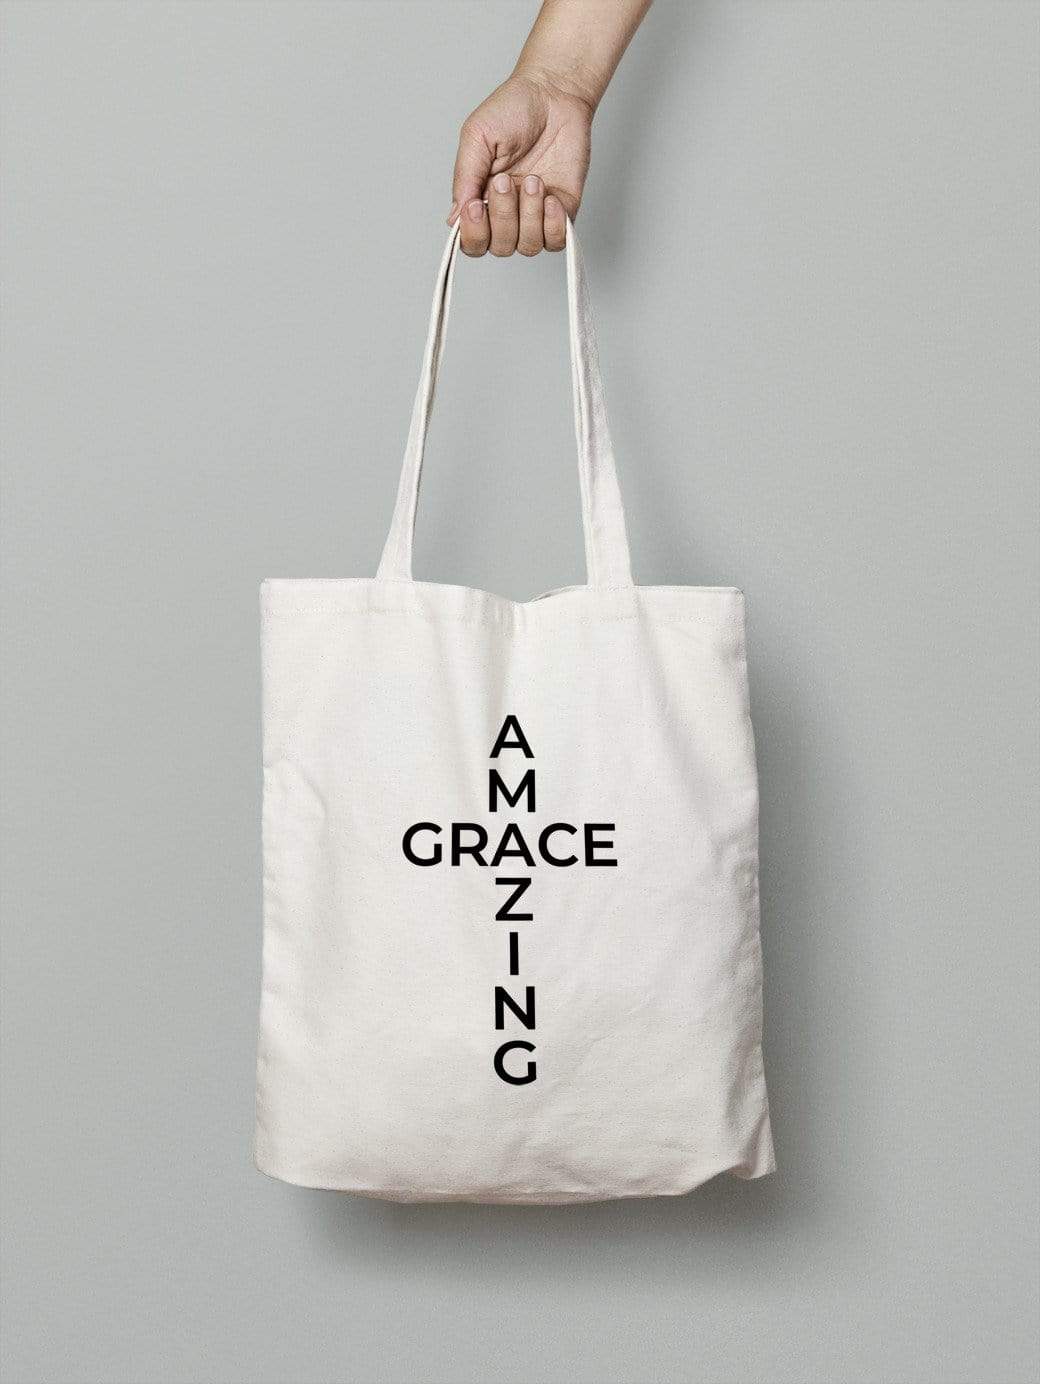 Living Words Amazing grace - Tote Bag